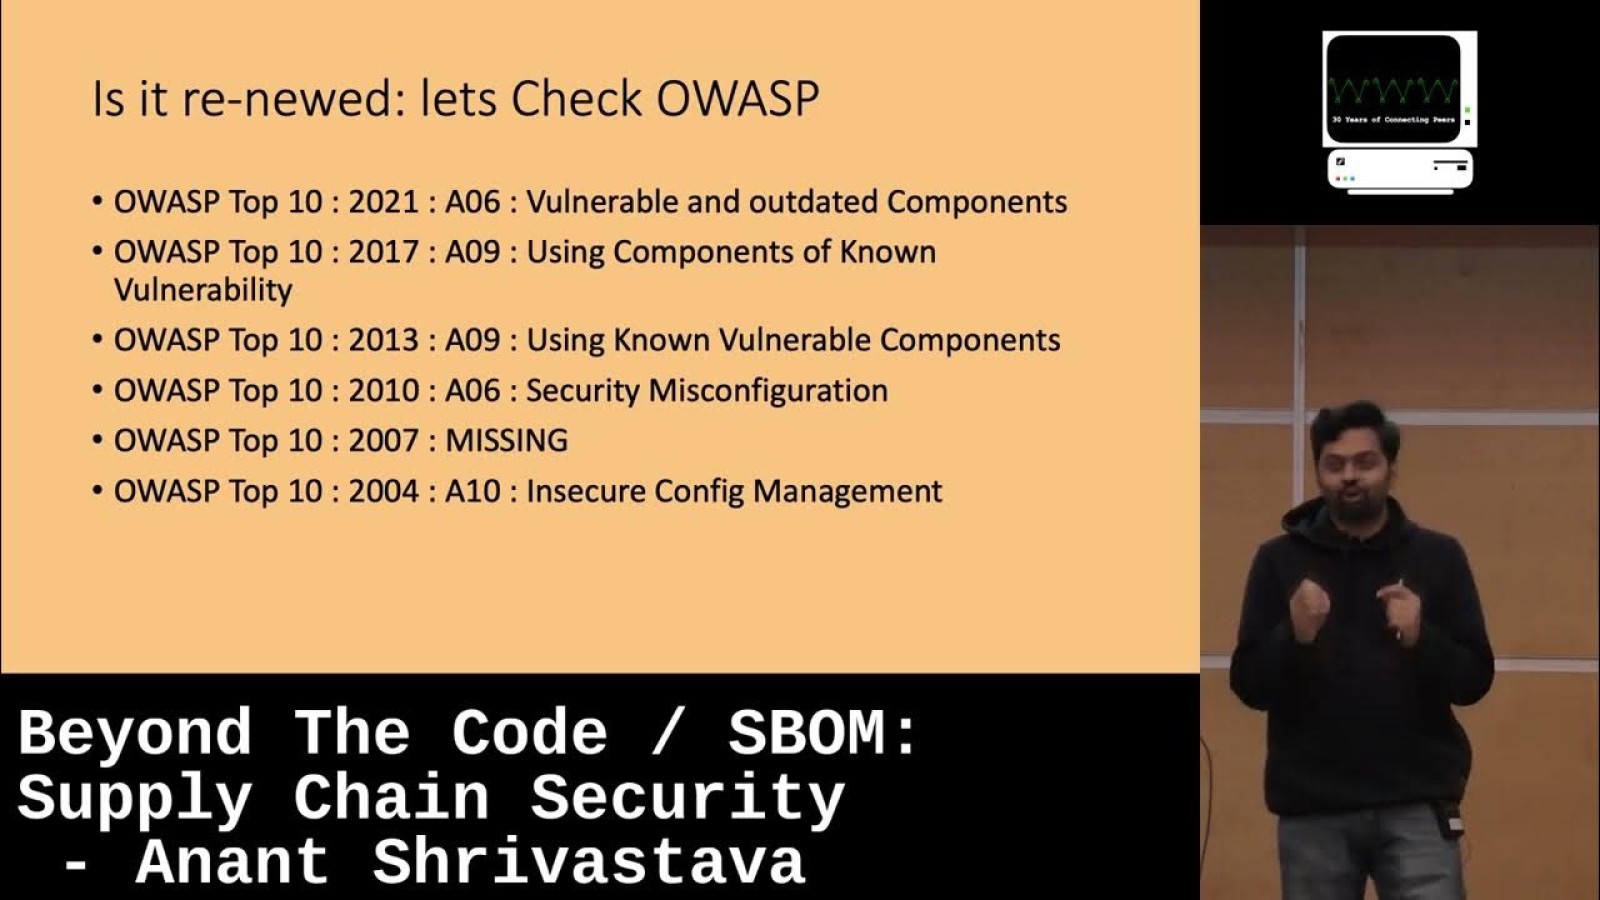 Beyond the Code / SBOM: Supply Chain Security